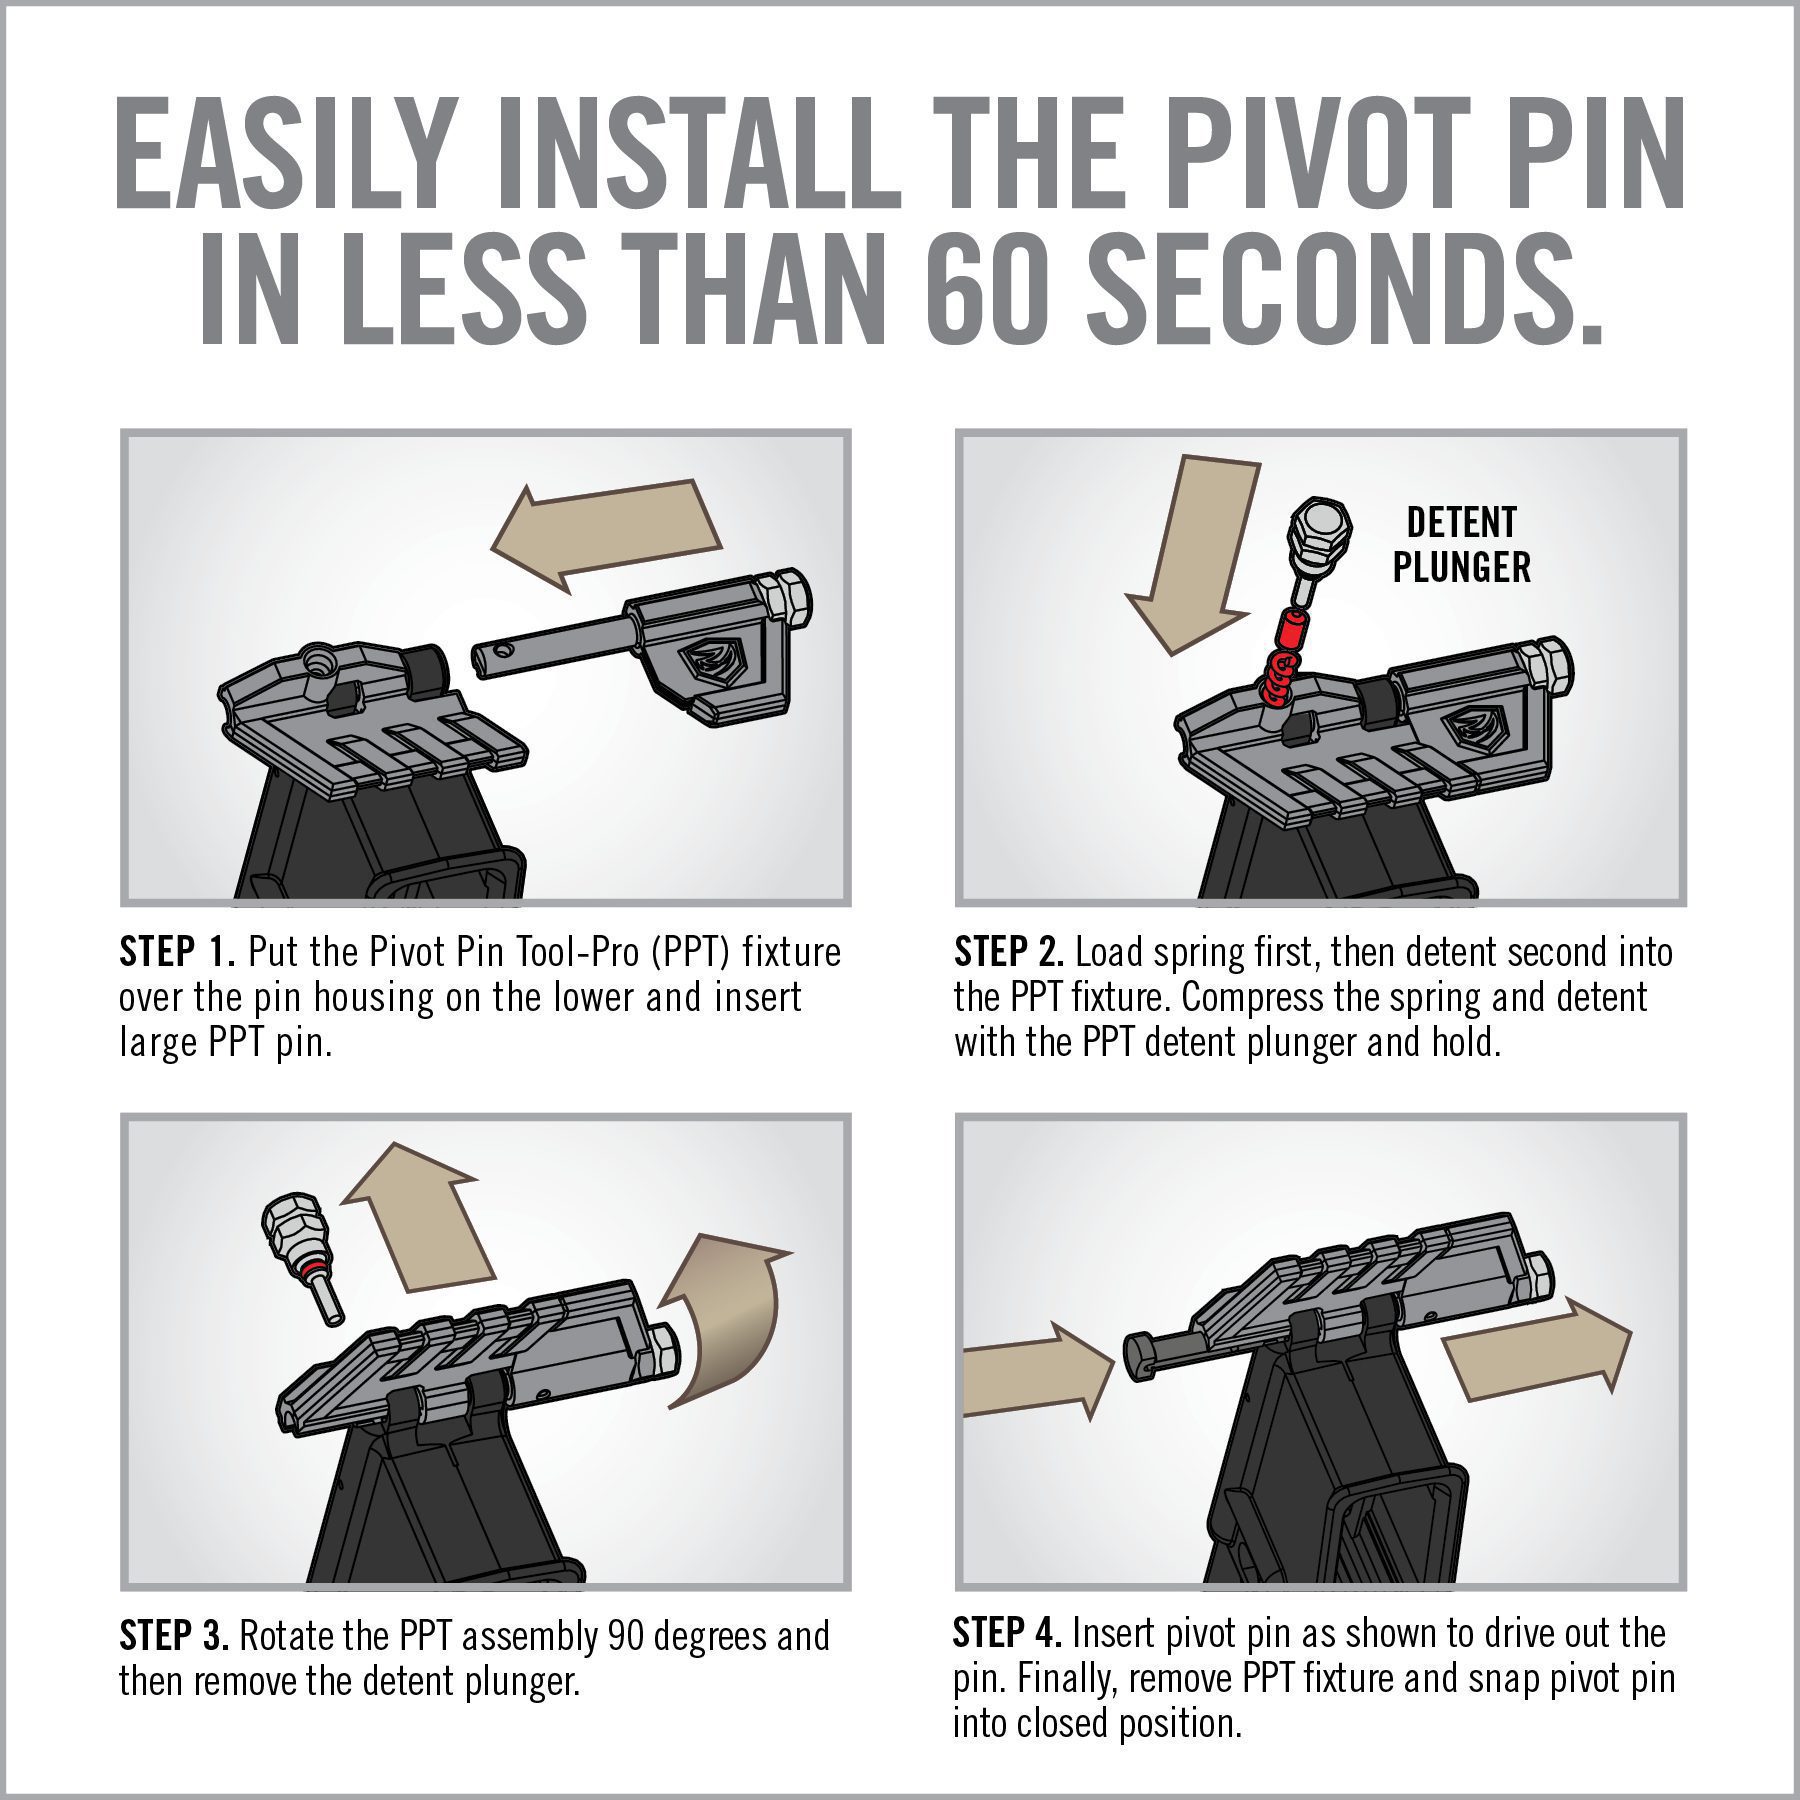 instructions for how to install the pivot pin in less than 60 seconds